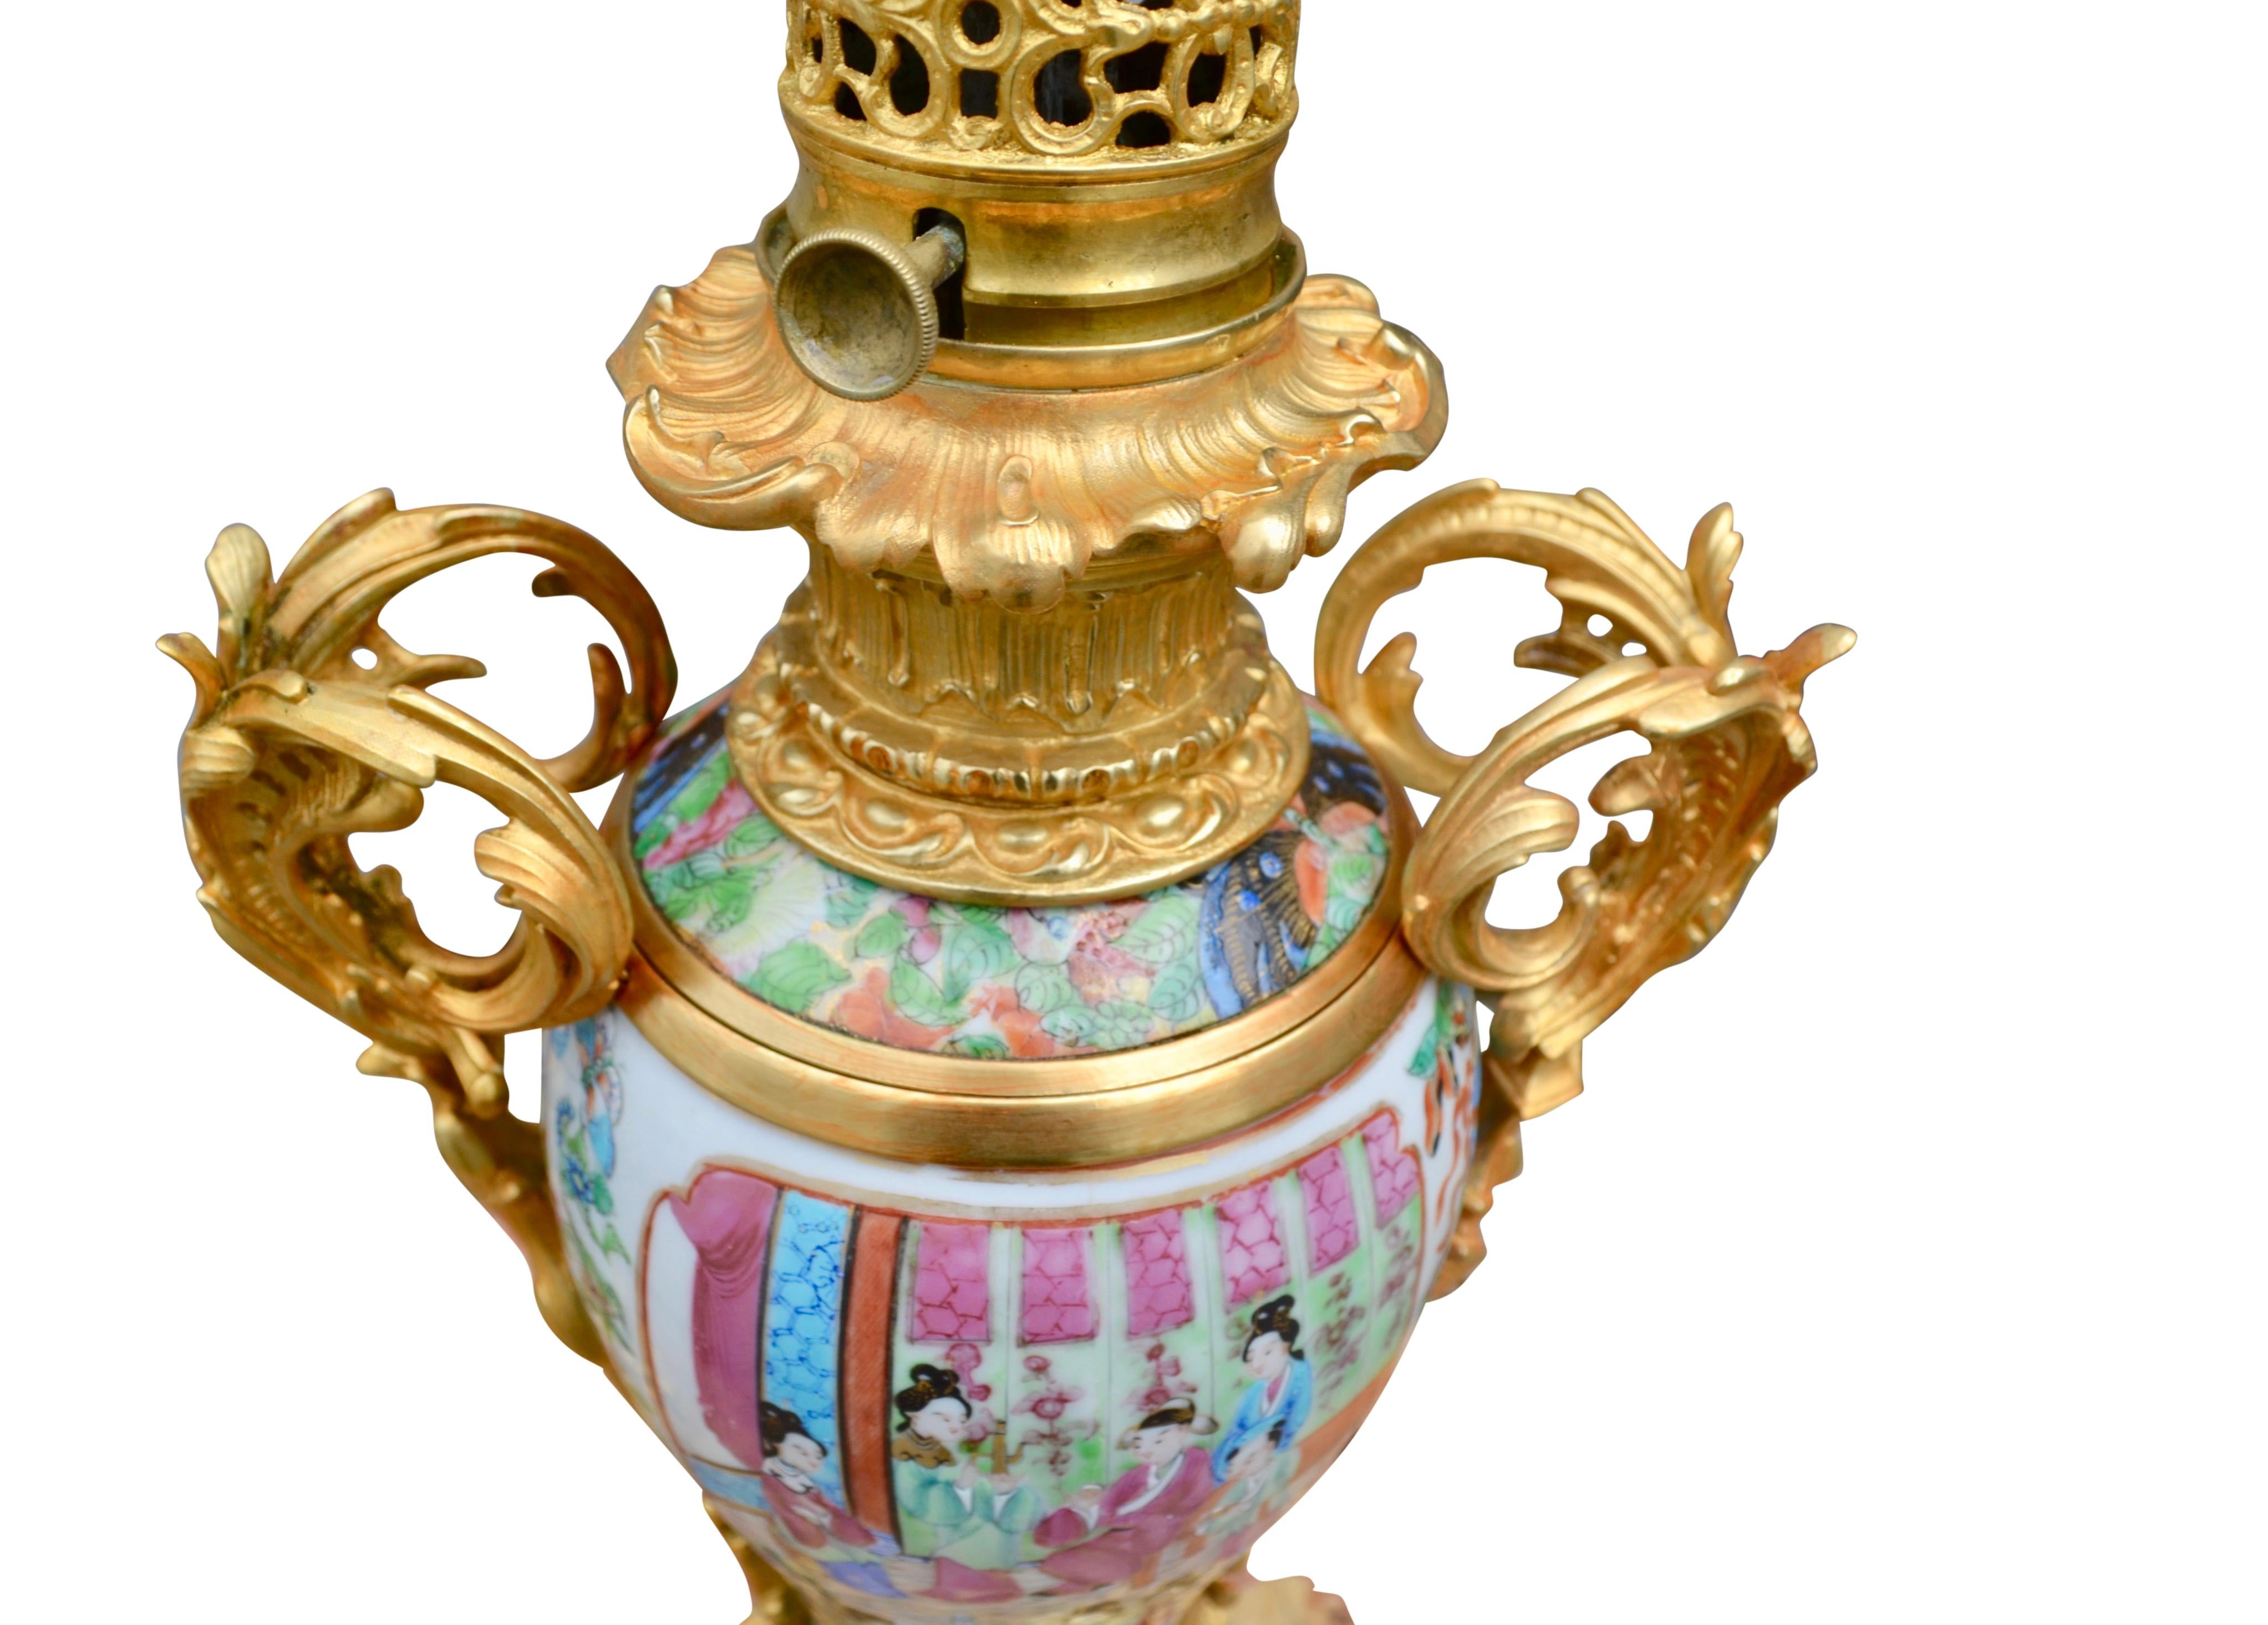 Rare Pair of Famille Rose Porcelain and Ormolu Napoleon III Oil Lamps For Sale 7